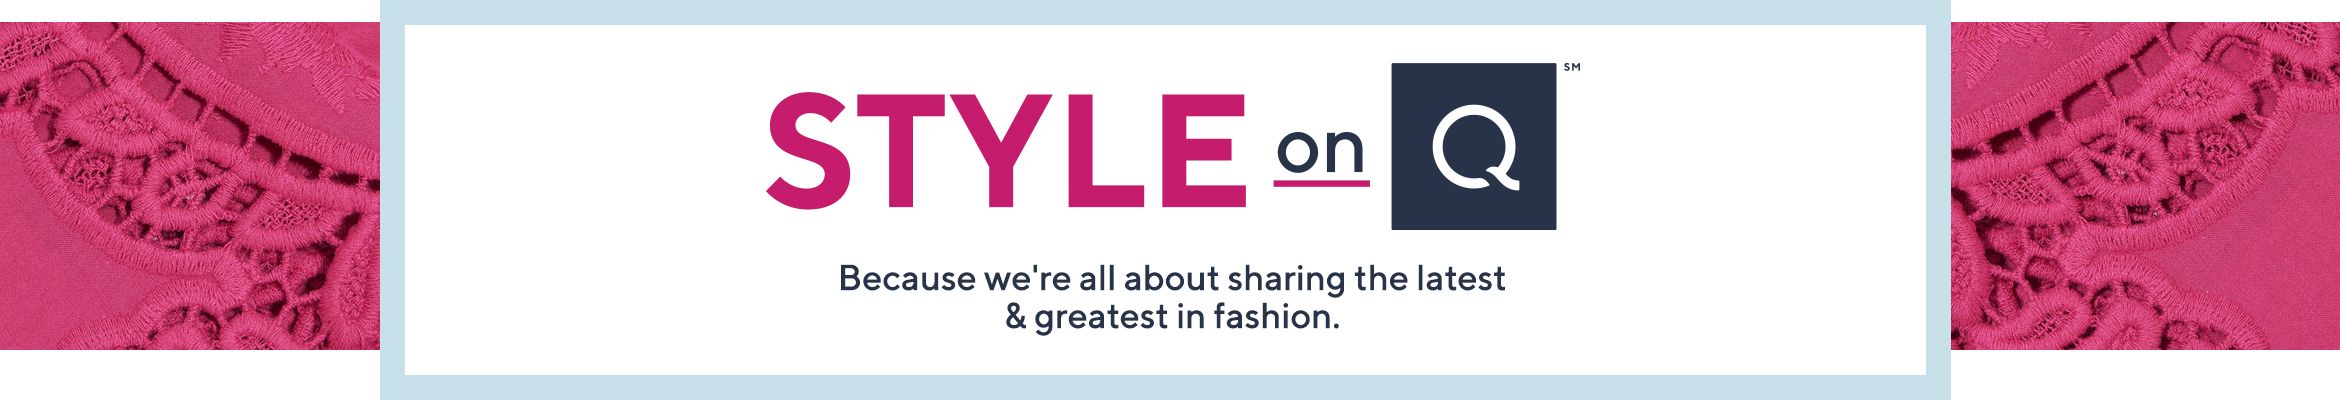 Style on Q™  Because we're all about sharing the latest & greatest in fashion.